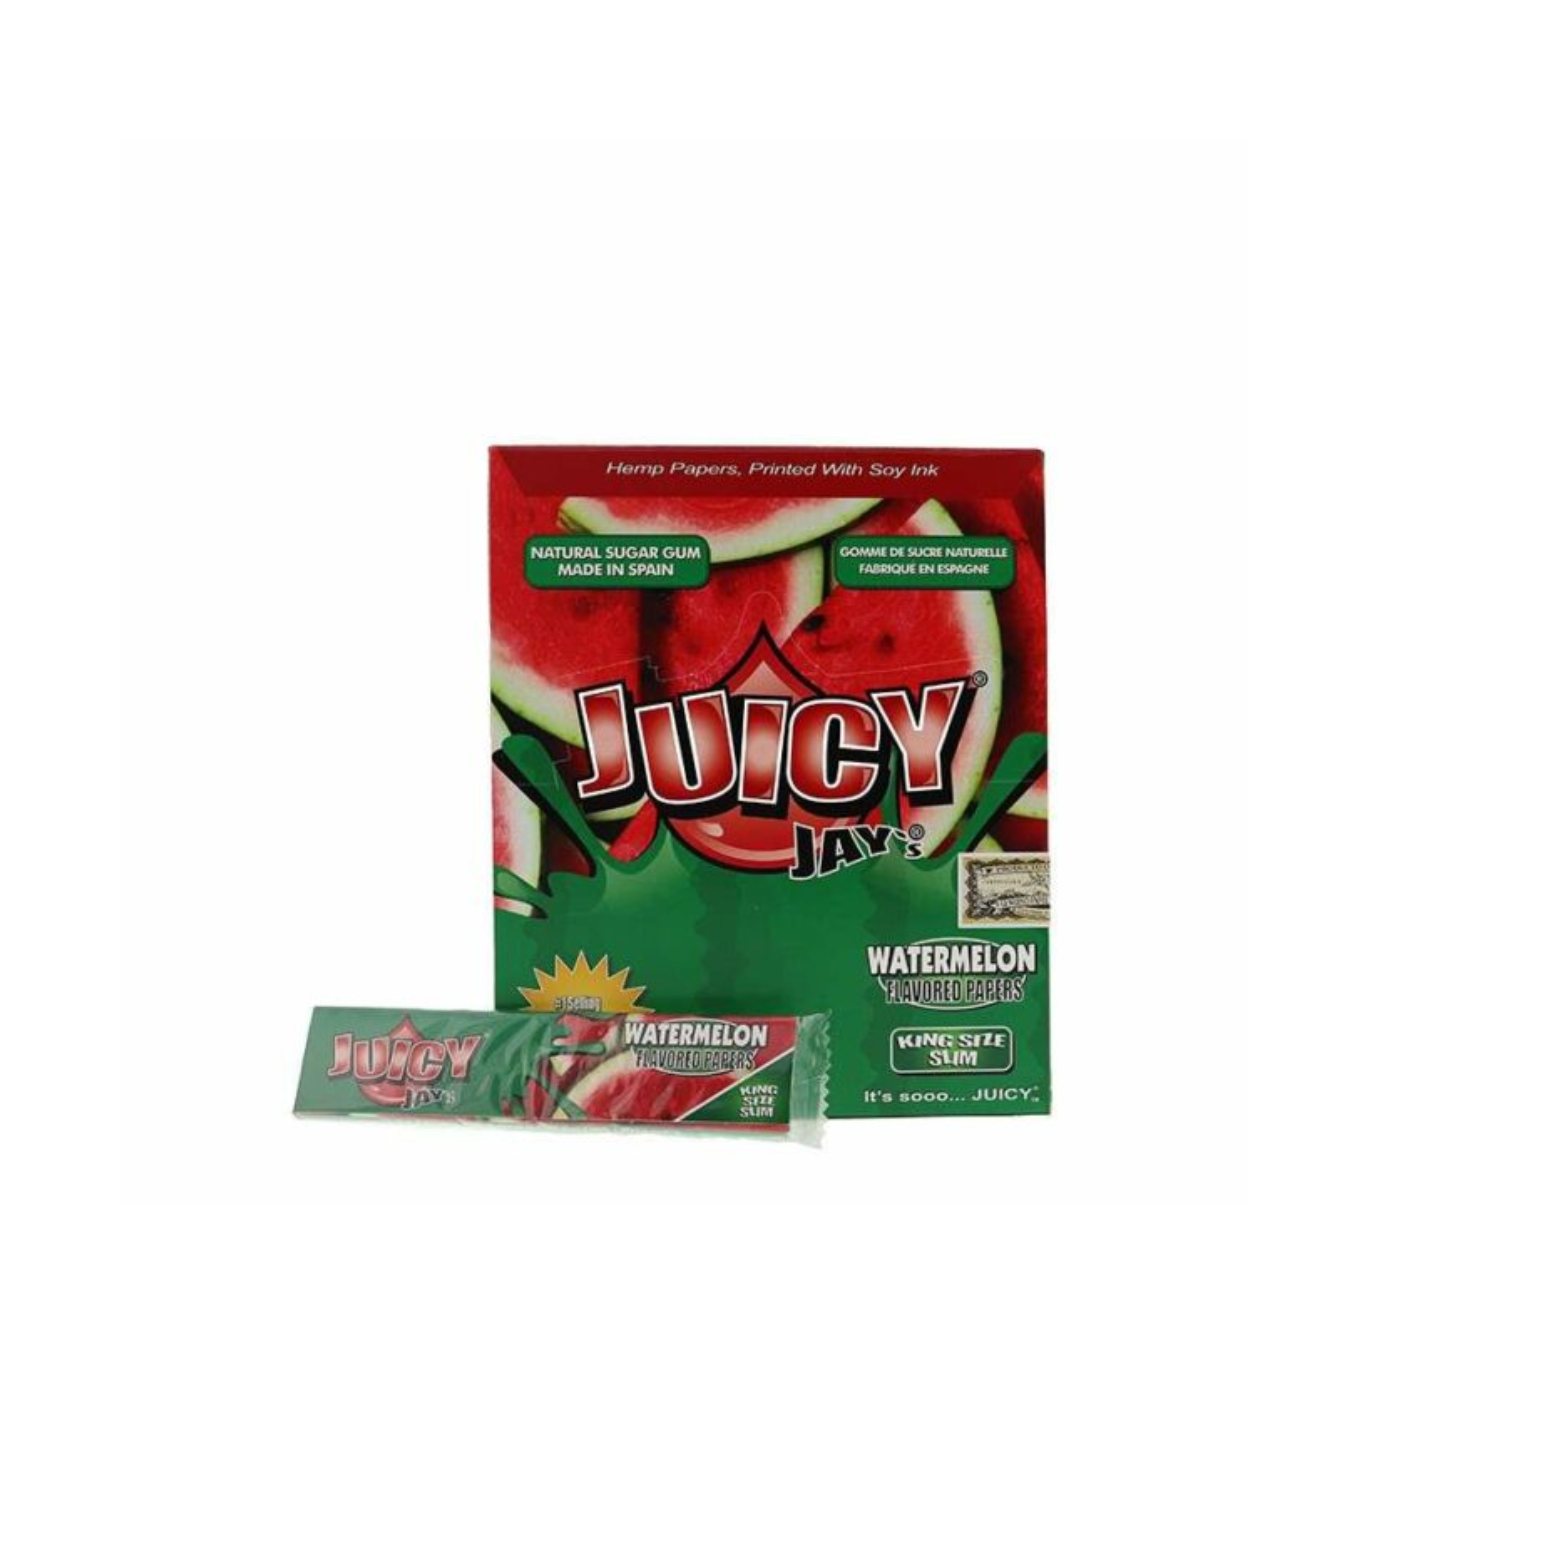 JUICY JAYs Watermelon King Size Slim Papers